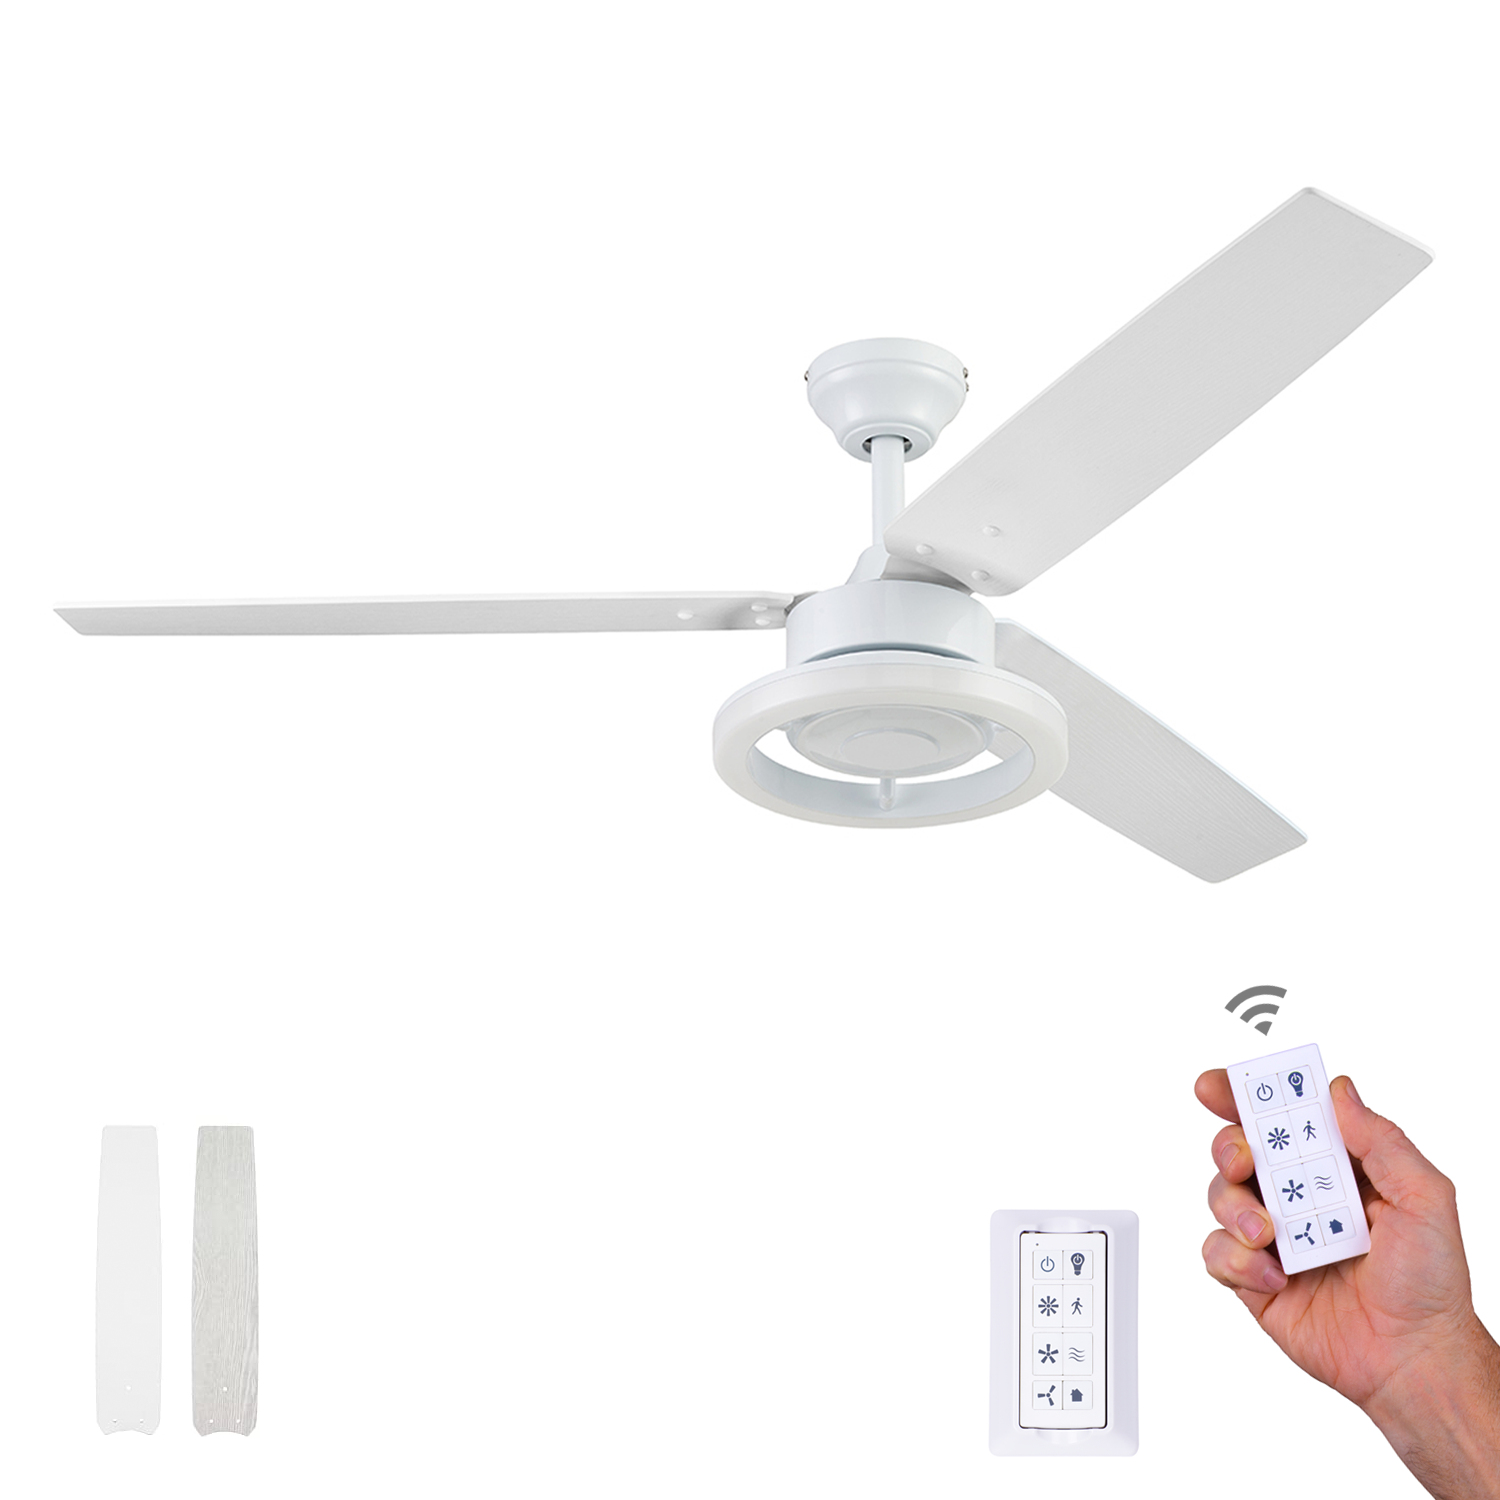 52 Inch Orbis, Bright White, Remote Control, Ceiling Fan by Prominence Home